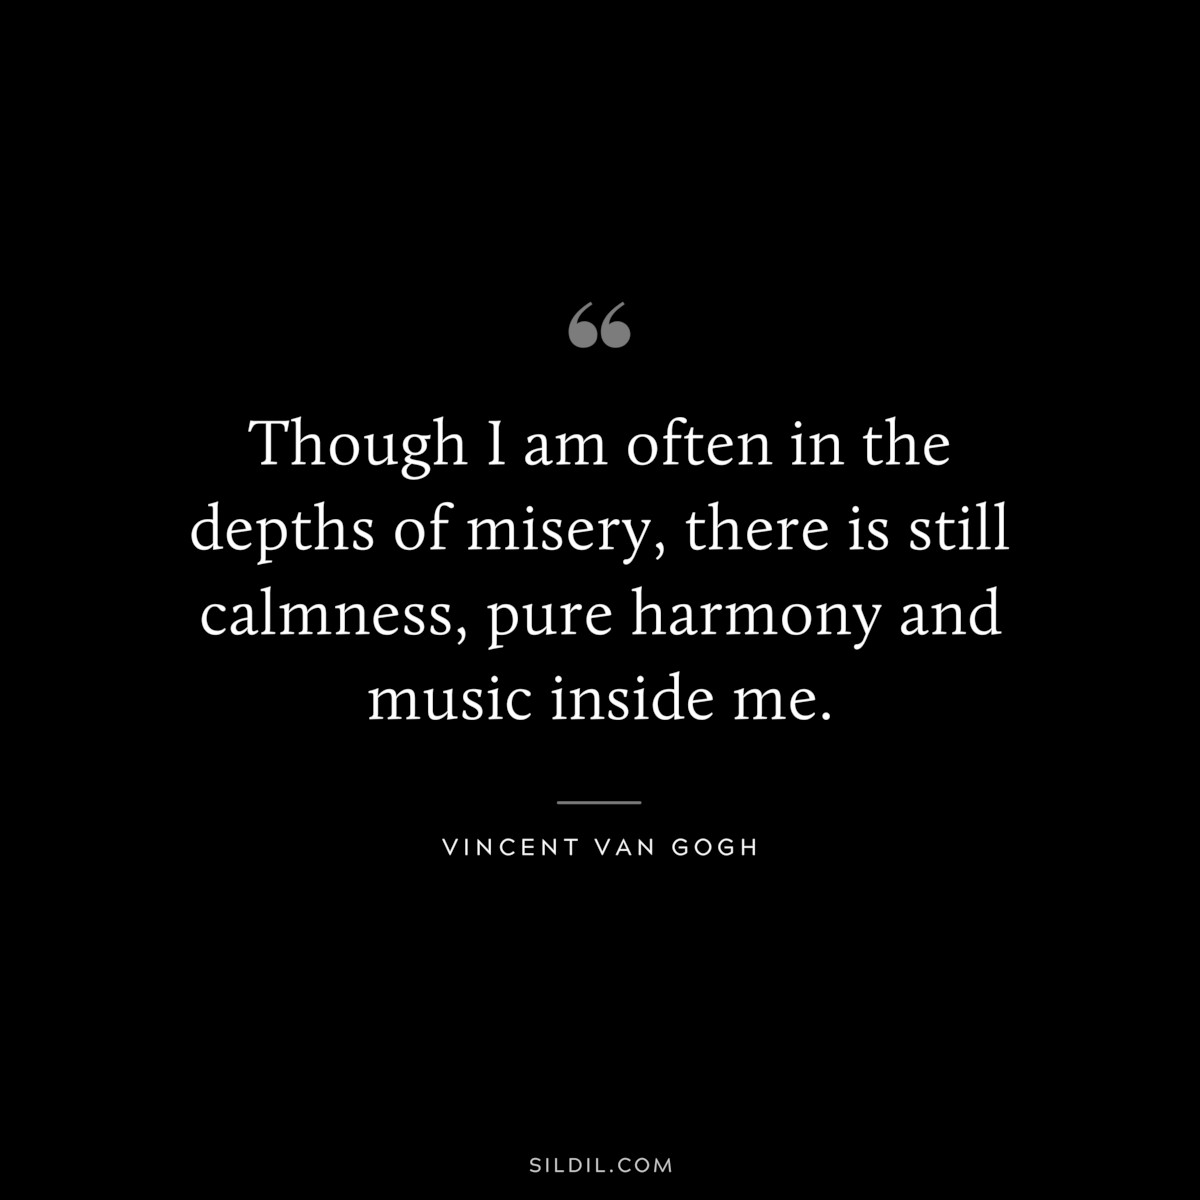 Though I am often in the depths of misery, there is still calmness, pure harmony and music inside me. ― Vincent van Gogh